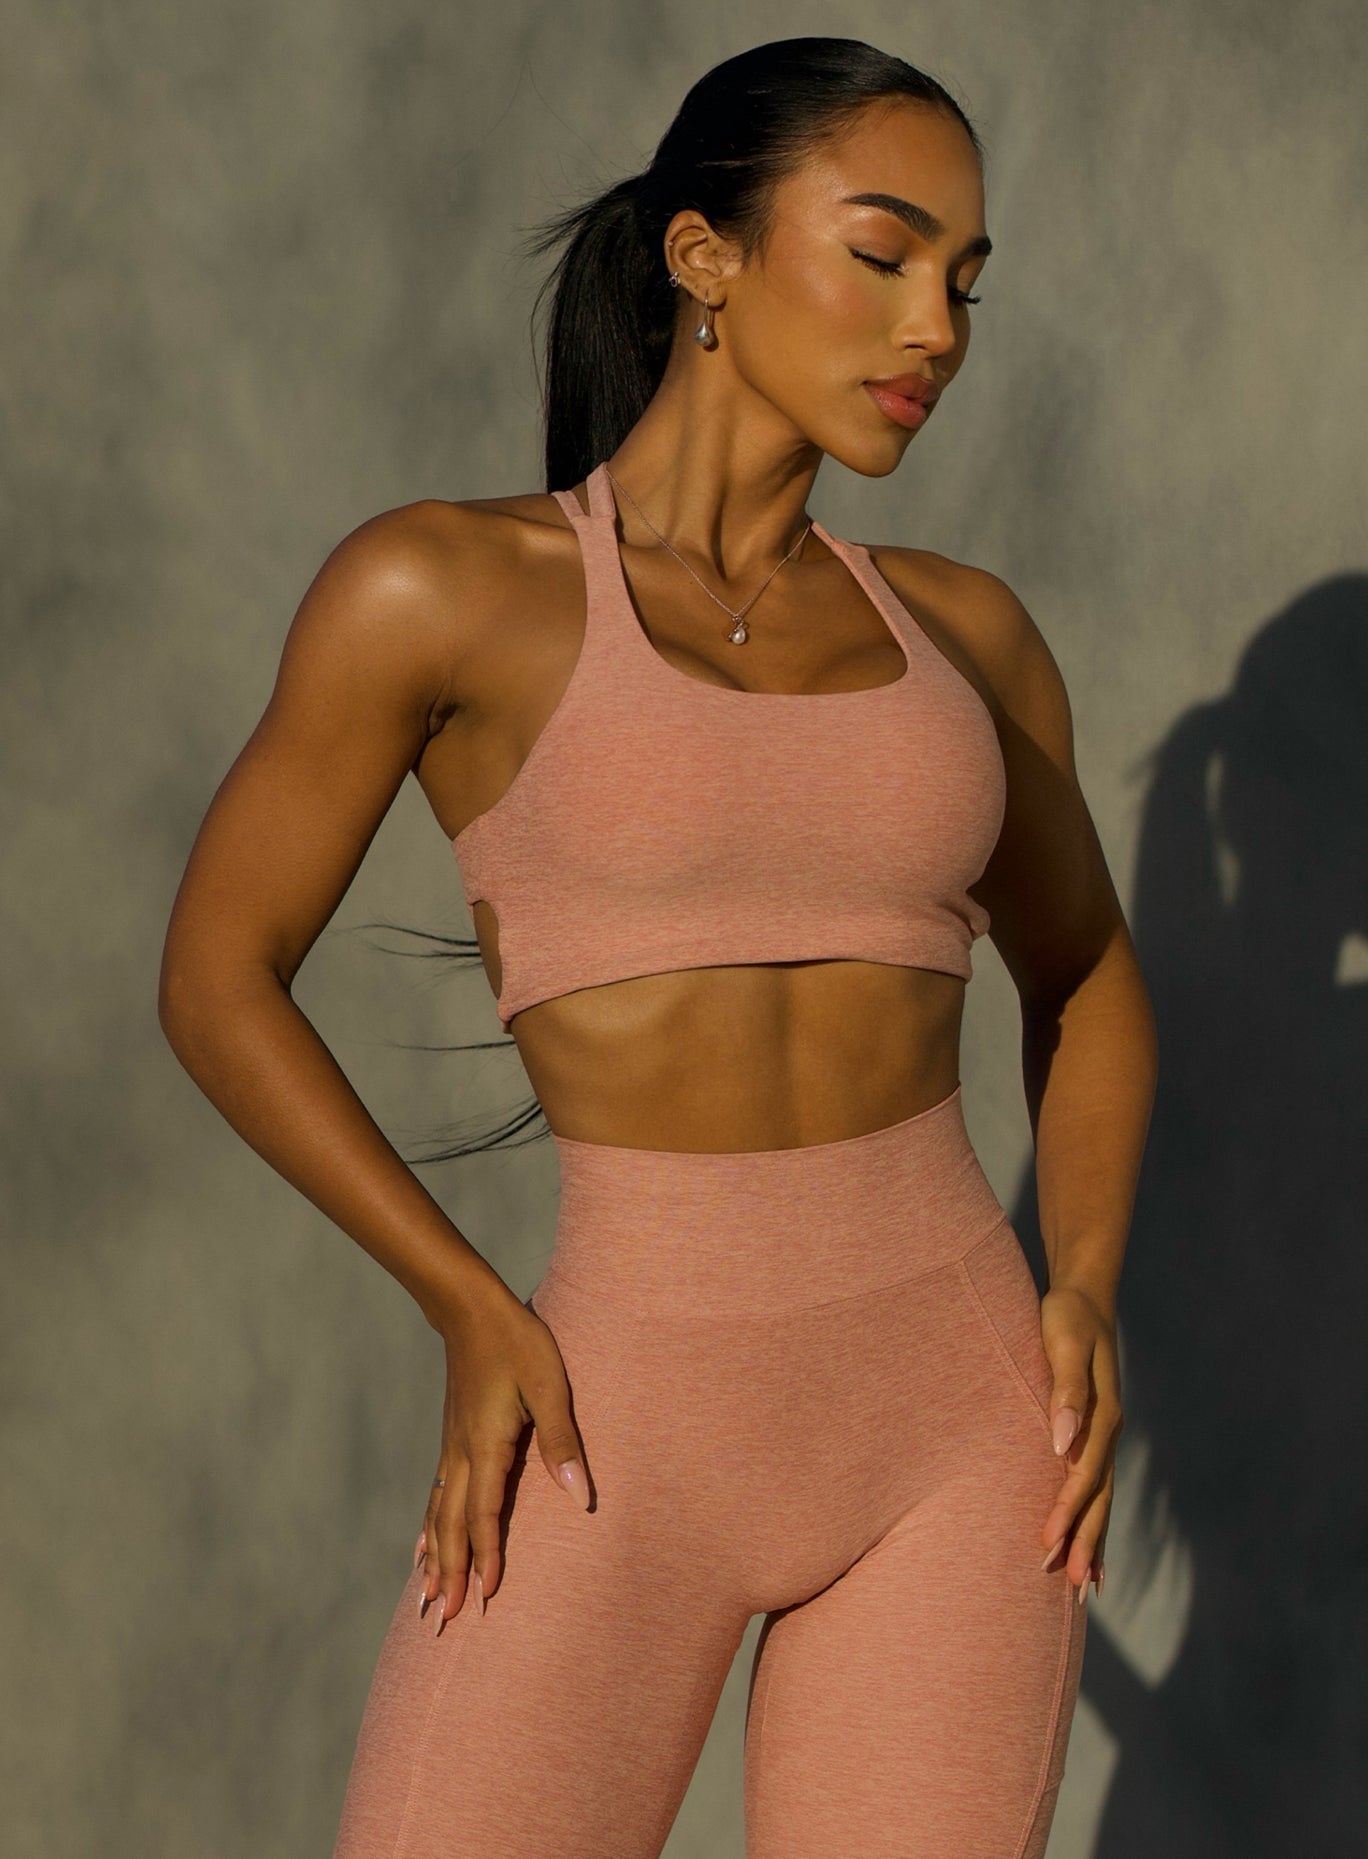 front  profile view of a model wearing our viral tank bra in nude sand color along with the matching leggings